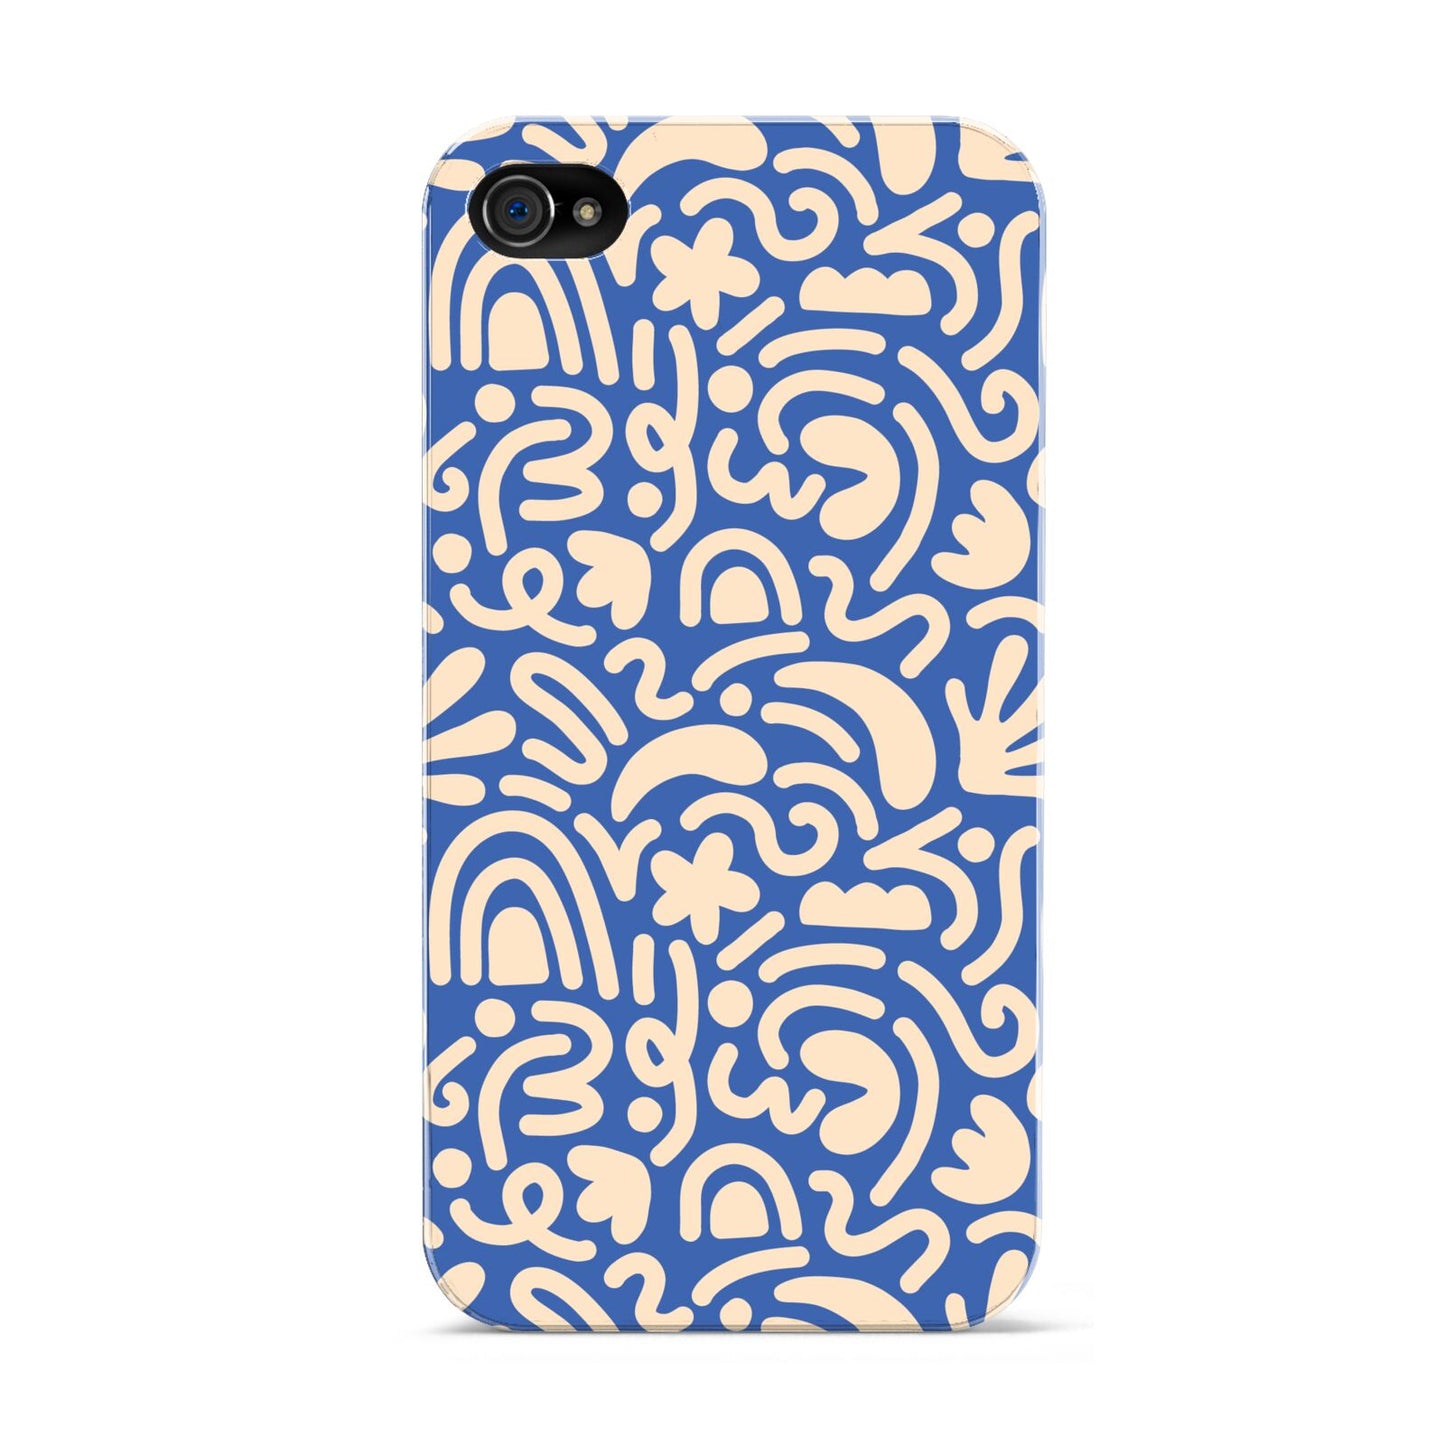 Abstract Apple iPhone 4s Case